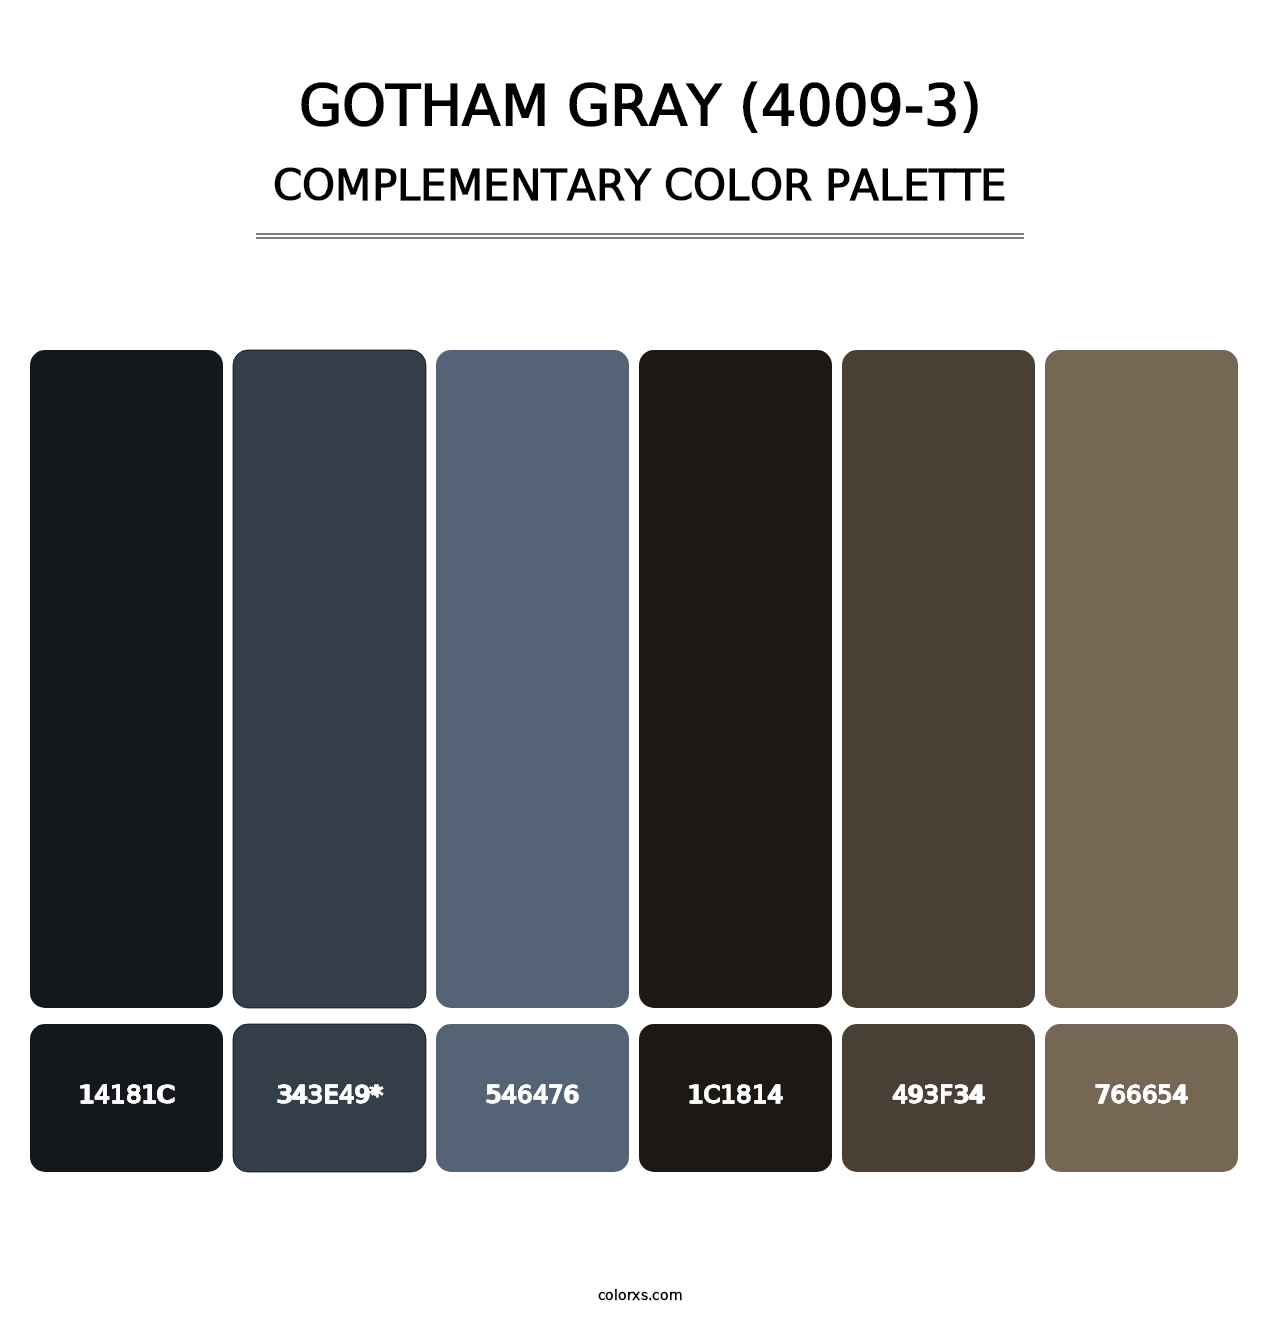 Gotham Gray (4009-3) - Complementary Color Palette